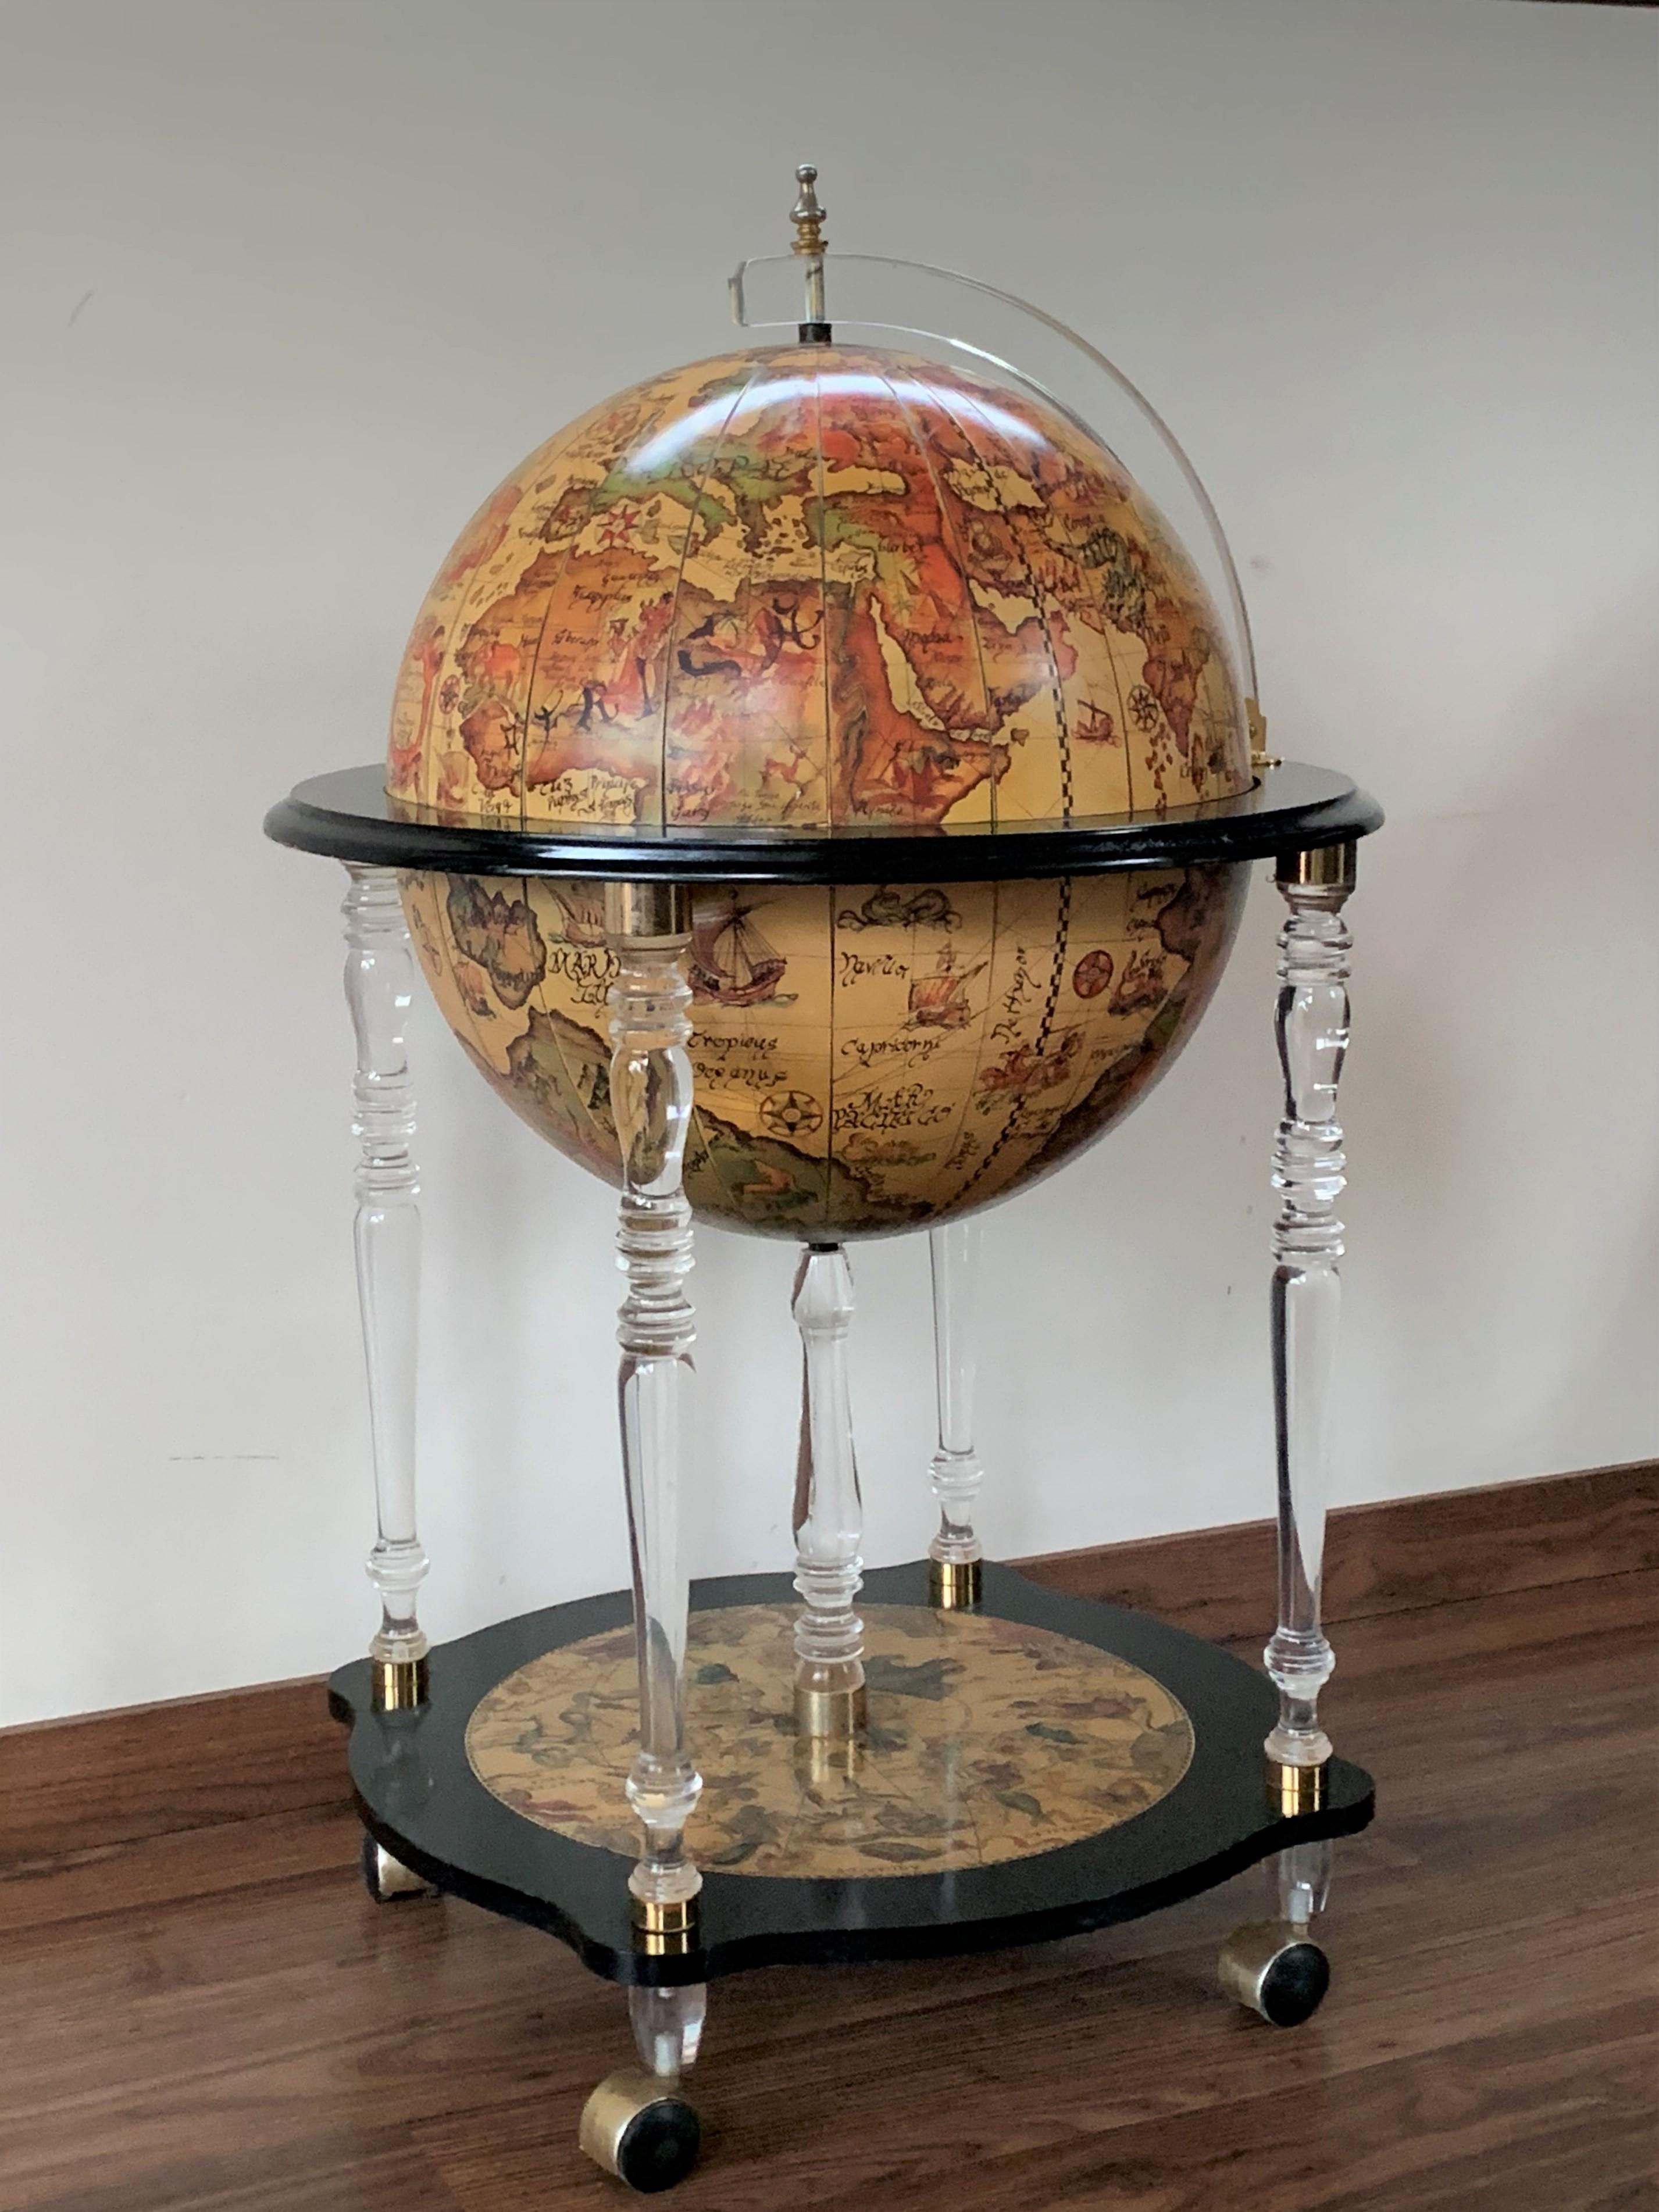 This is a modernist midcentury cocktail drinks cabinet in the form of a globe, circa 1950 in date.

The hinged top section opens to reveal a fitted interior with spaces for glasses and an ice bucket.

The exterior of the globe has the map of the